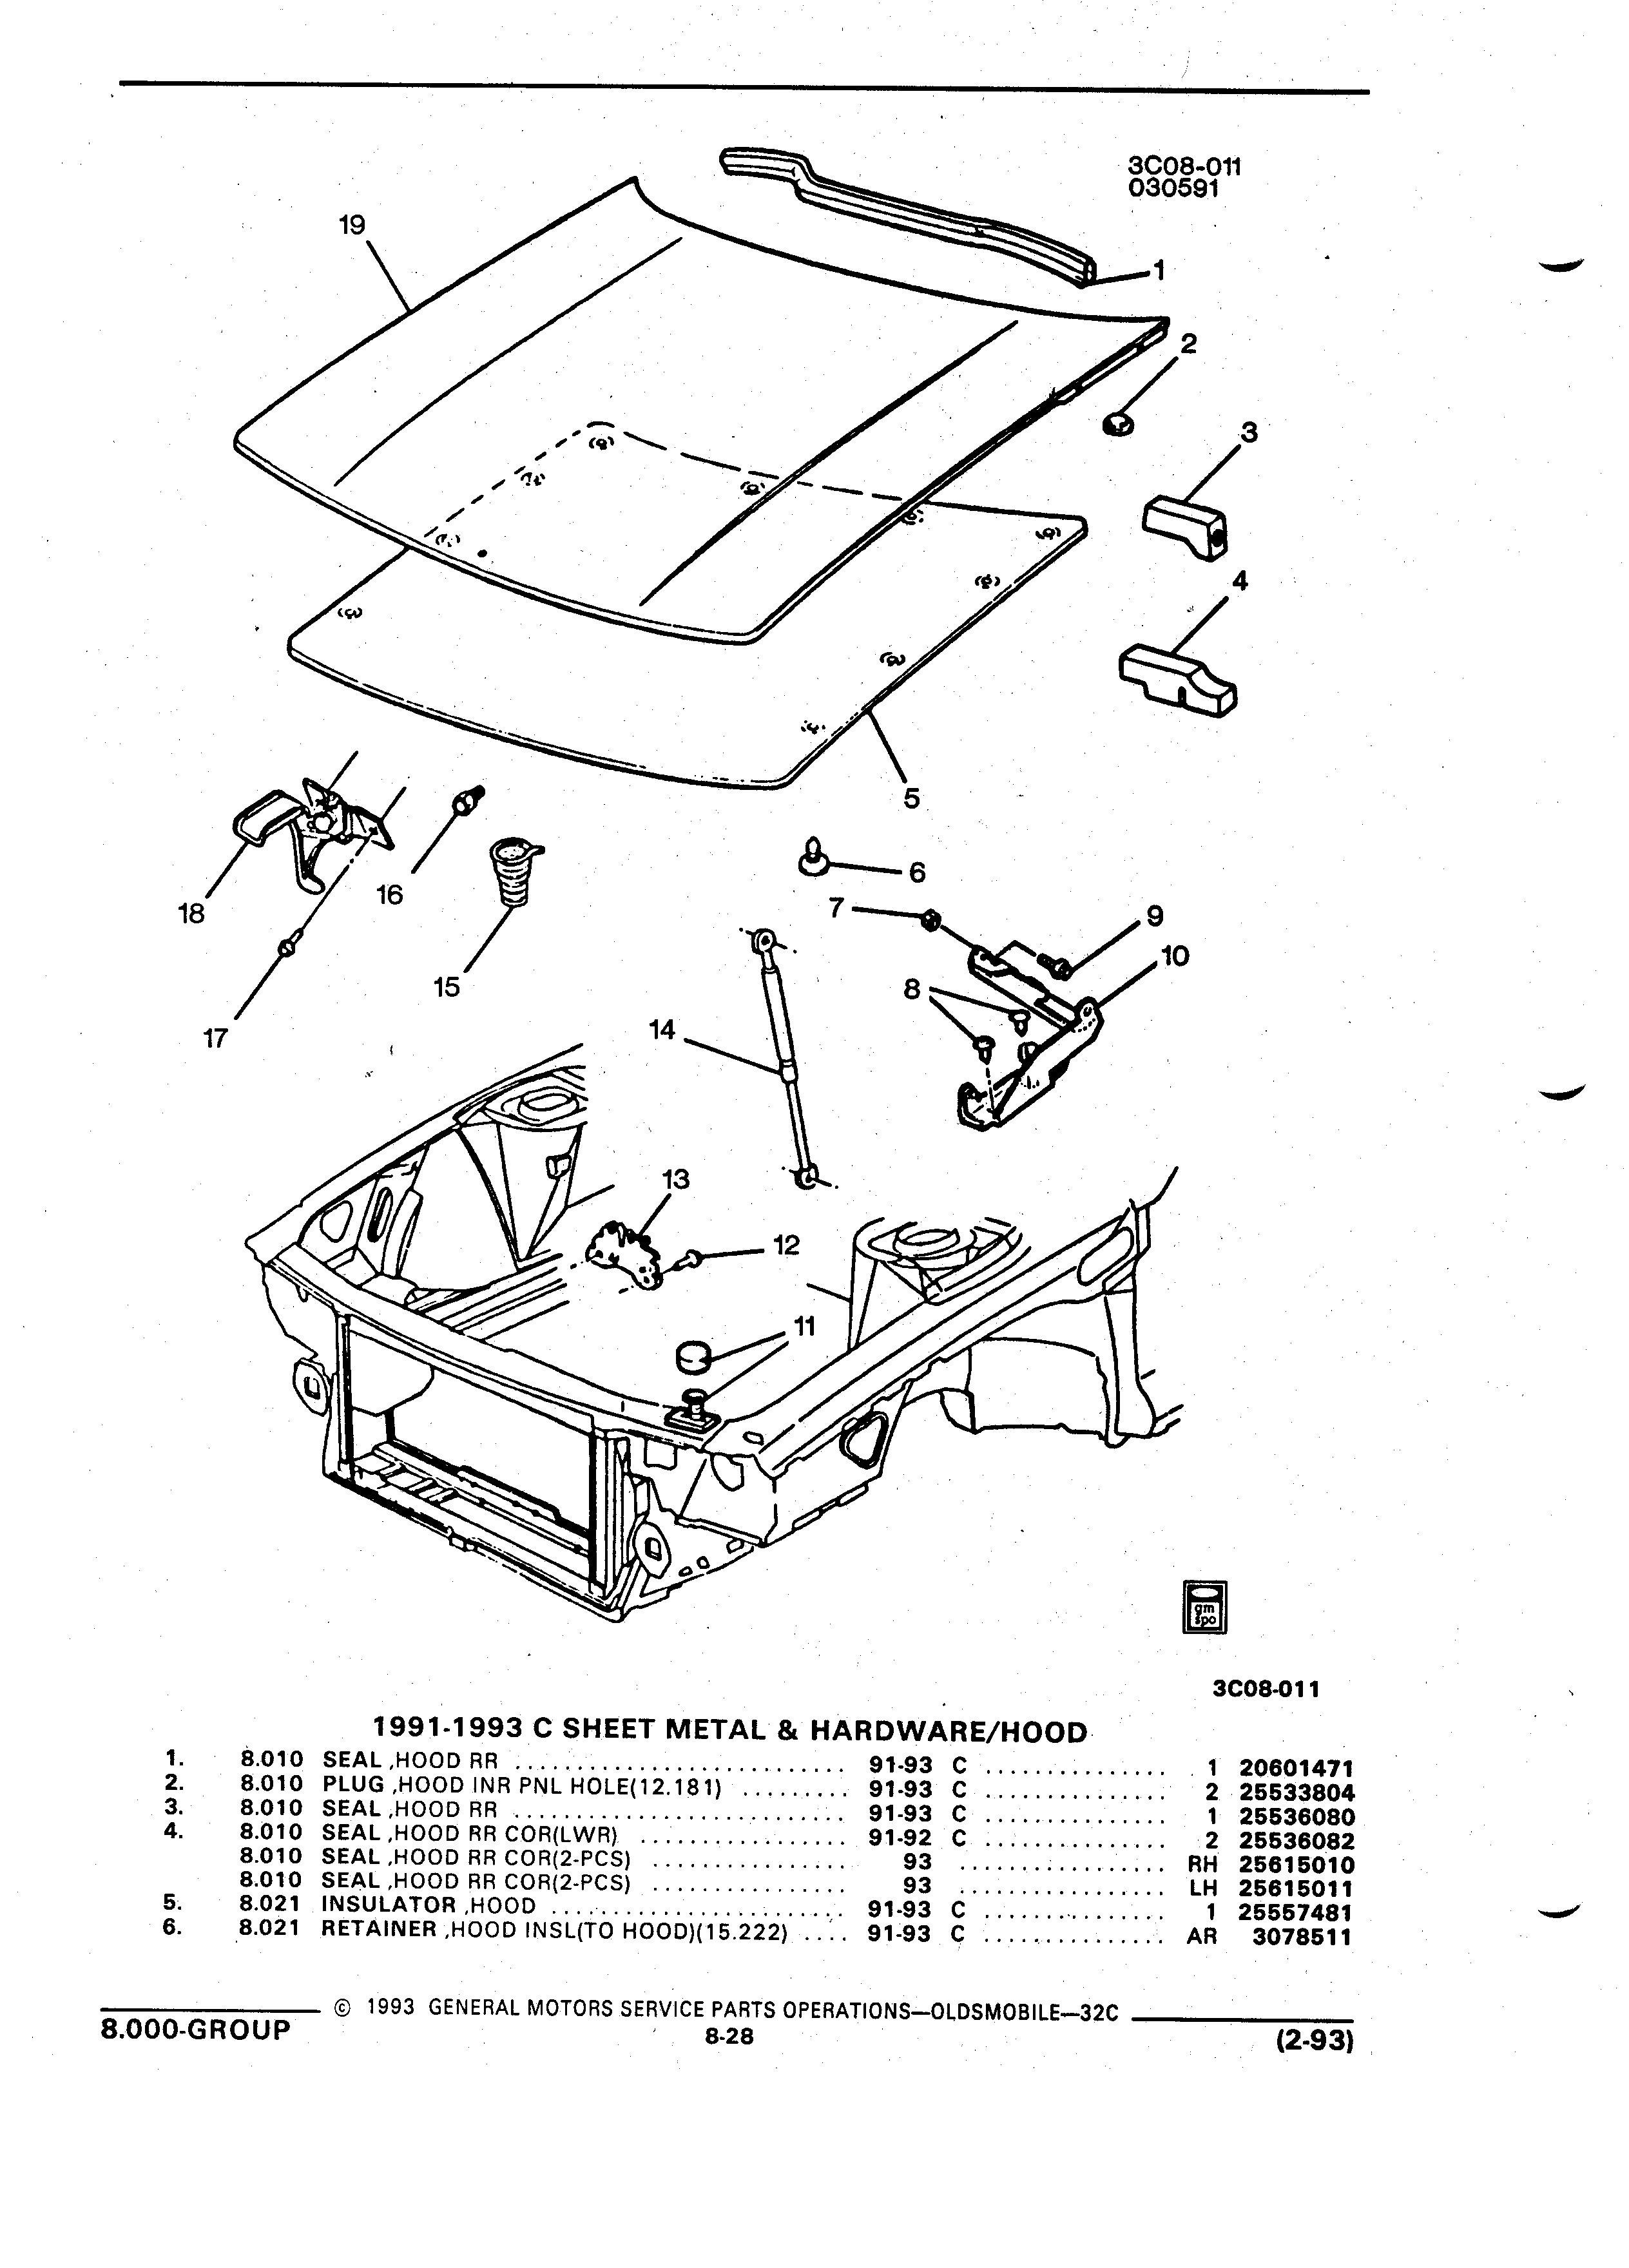 Parts and Accessories Catalog 32C February 1993